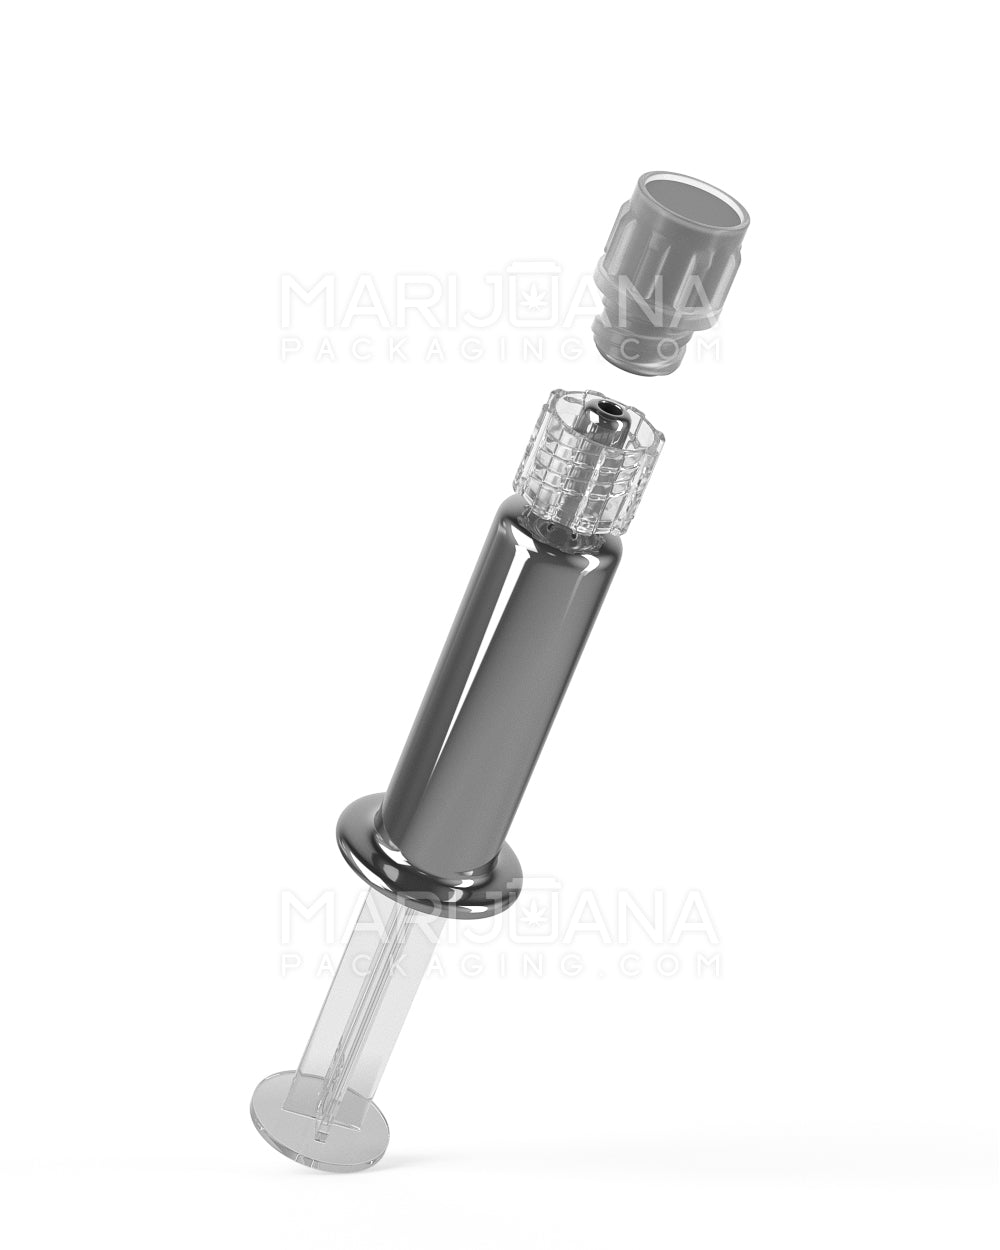 Luer Lock | Silver Glass Dab Applicator Syringes | 1mL - No Measurements - 100 Count - 5